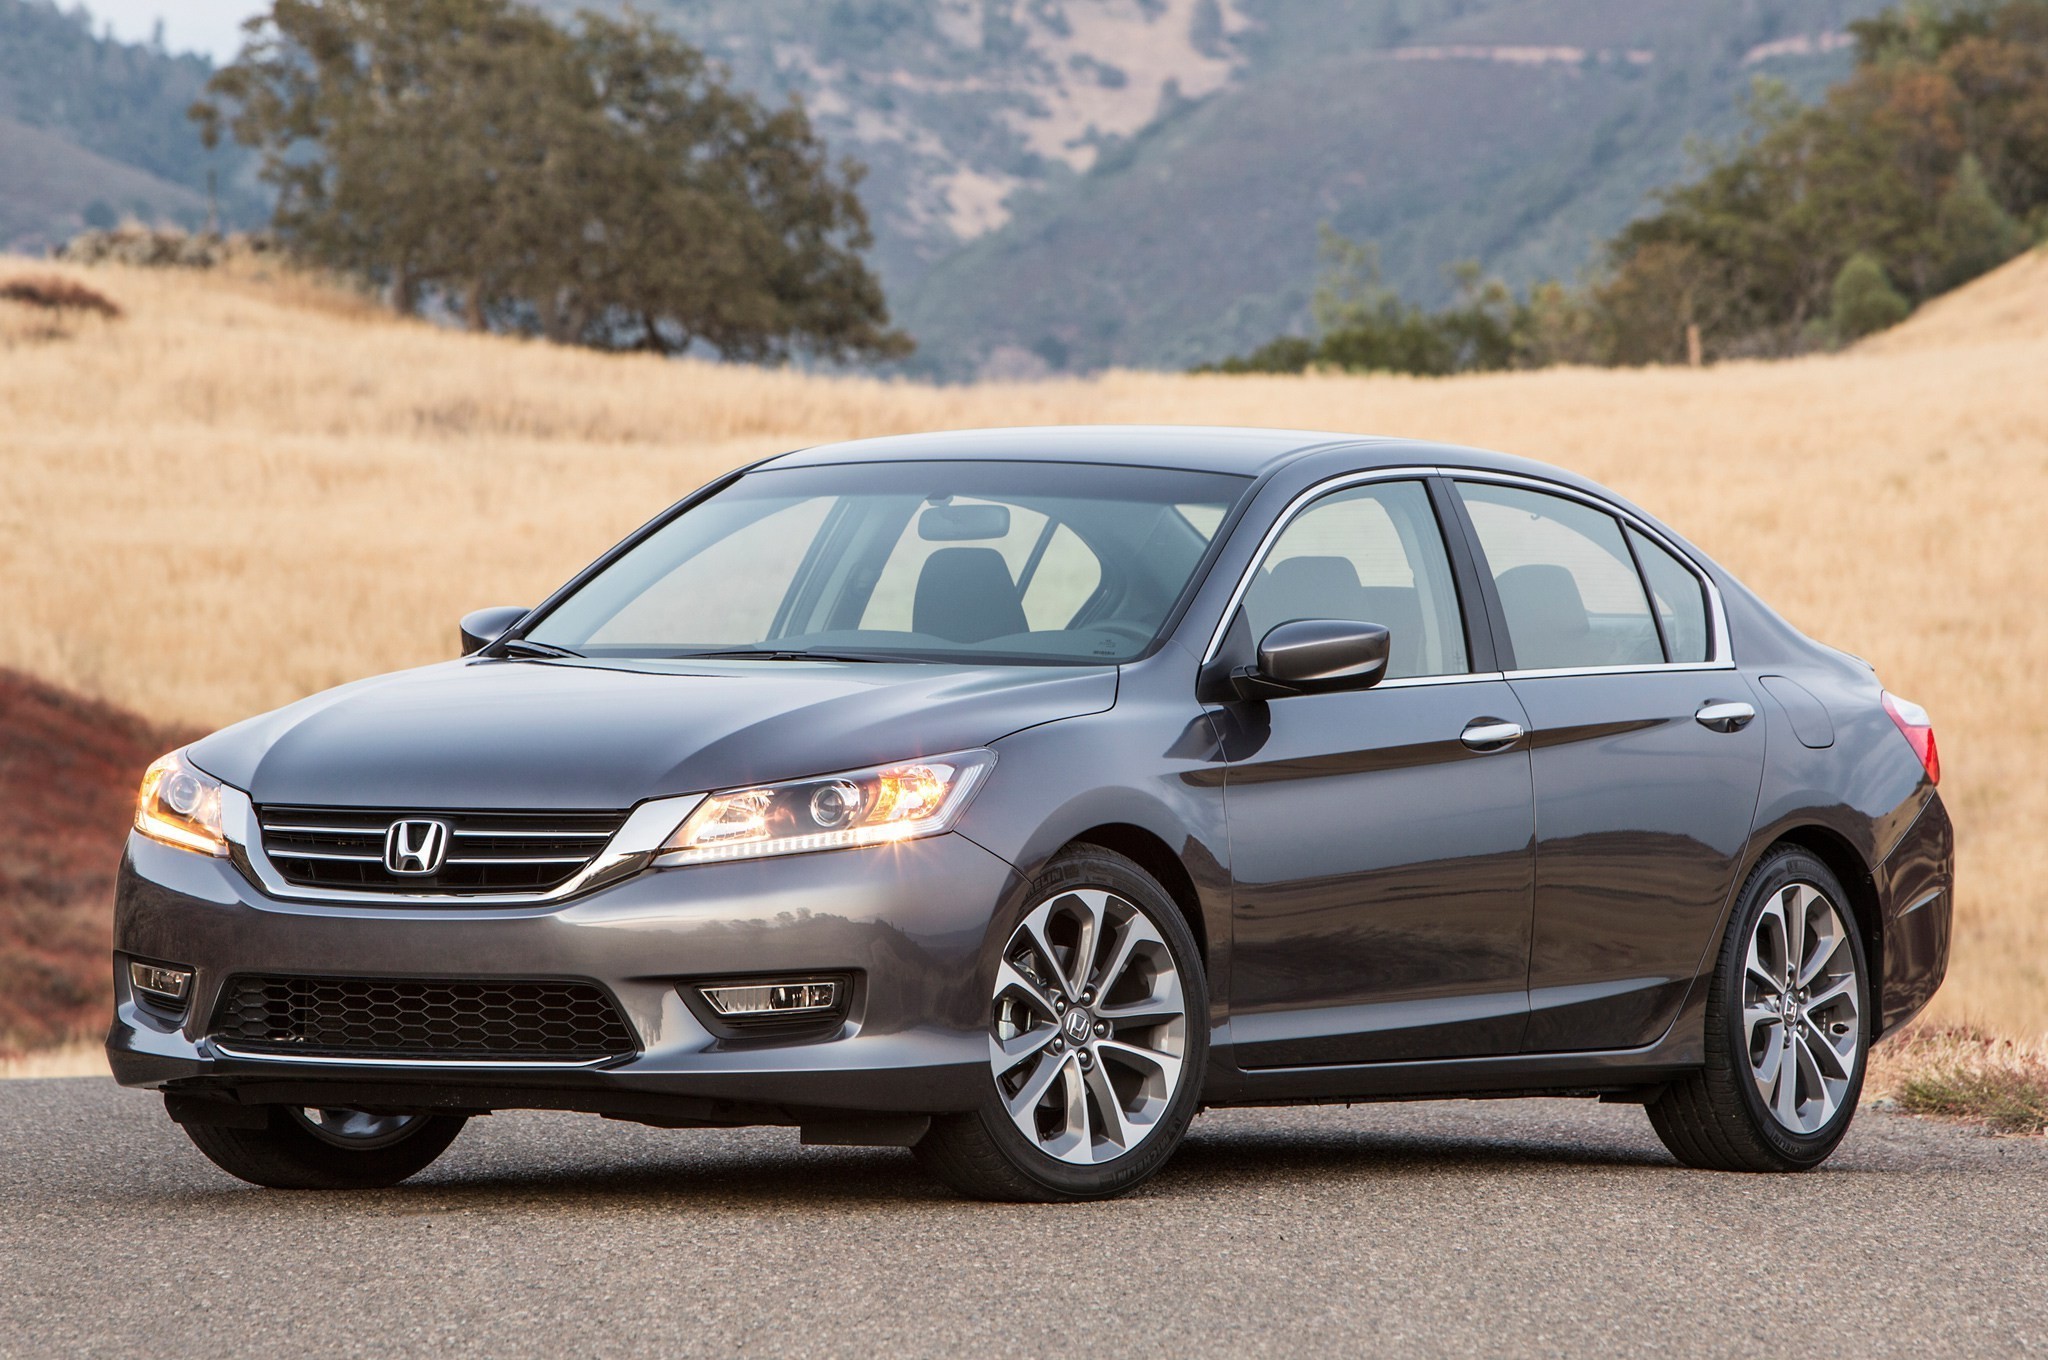 2048x1360 2015 Honda Accord Hybrid Wallpaper Hd Photos Wallpapers And Other 2014 Sport